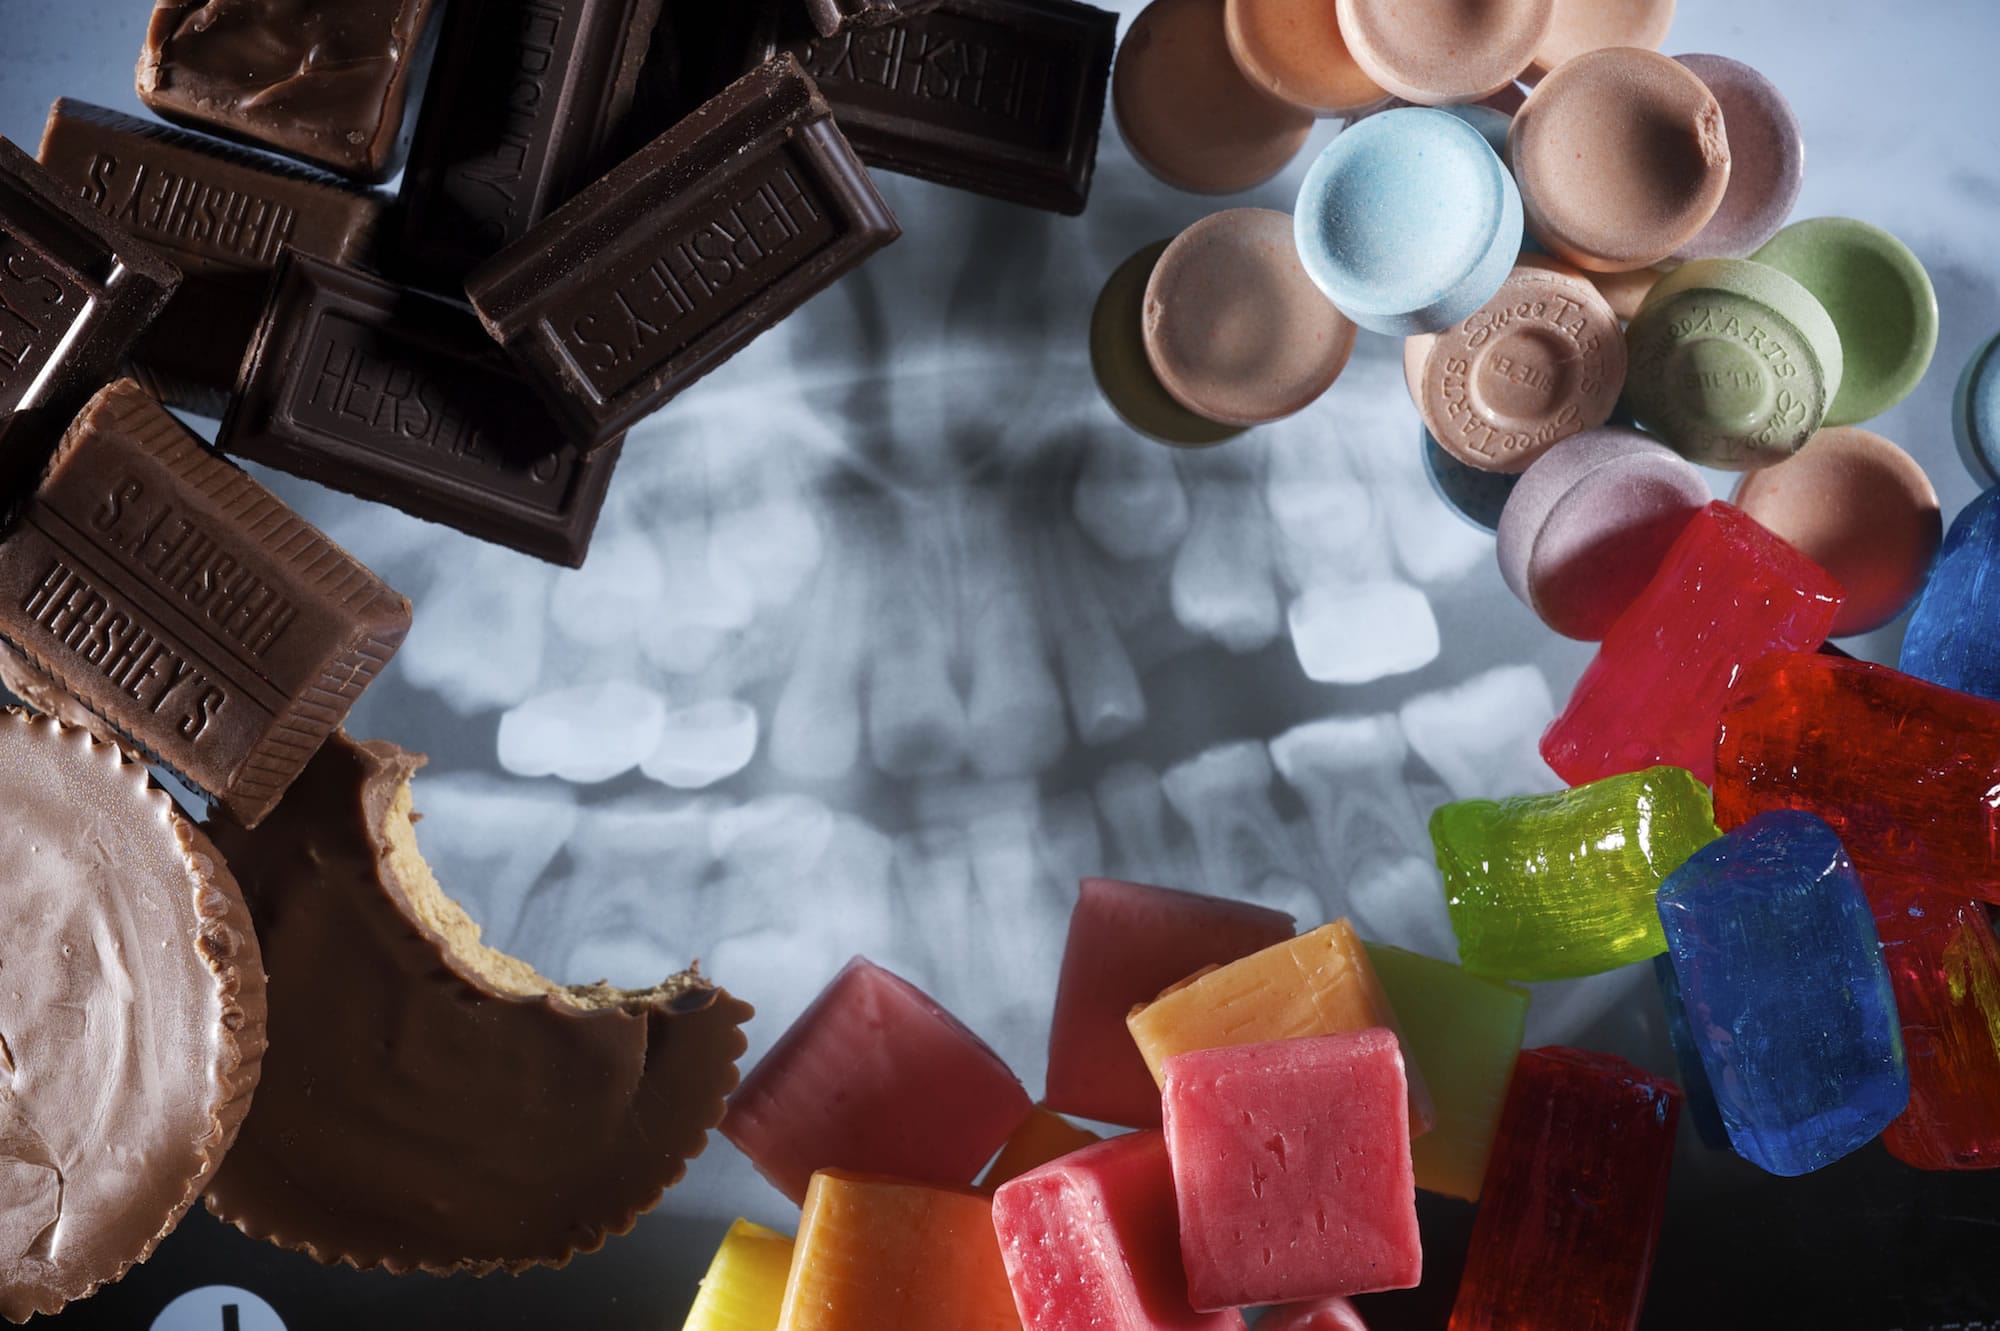 Steven Lane/The Columbian
As Halloween approaches, dentists explain why overindulging on candy isn't such a great idea. They also provide tips for minimizing sugar damage to teeth.